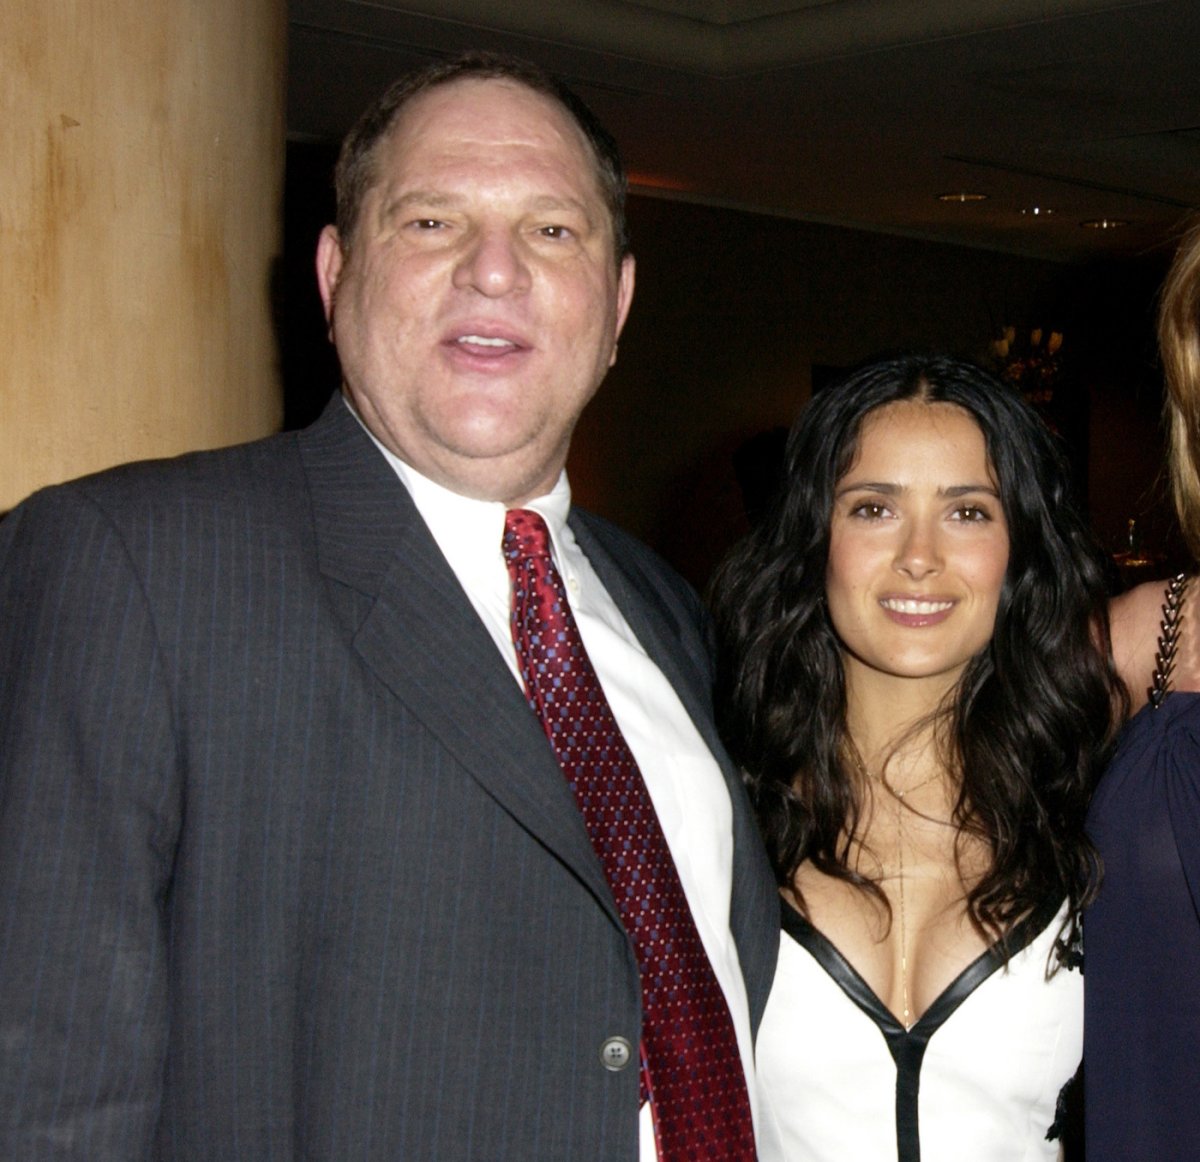 Harvey Weinstein and Salma Hayek at an industry party in 2003.